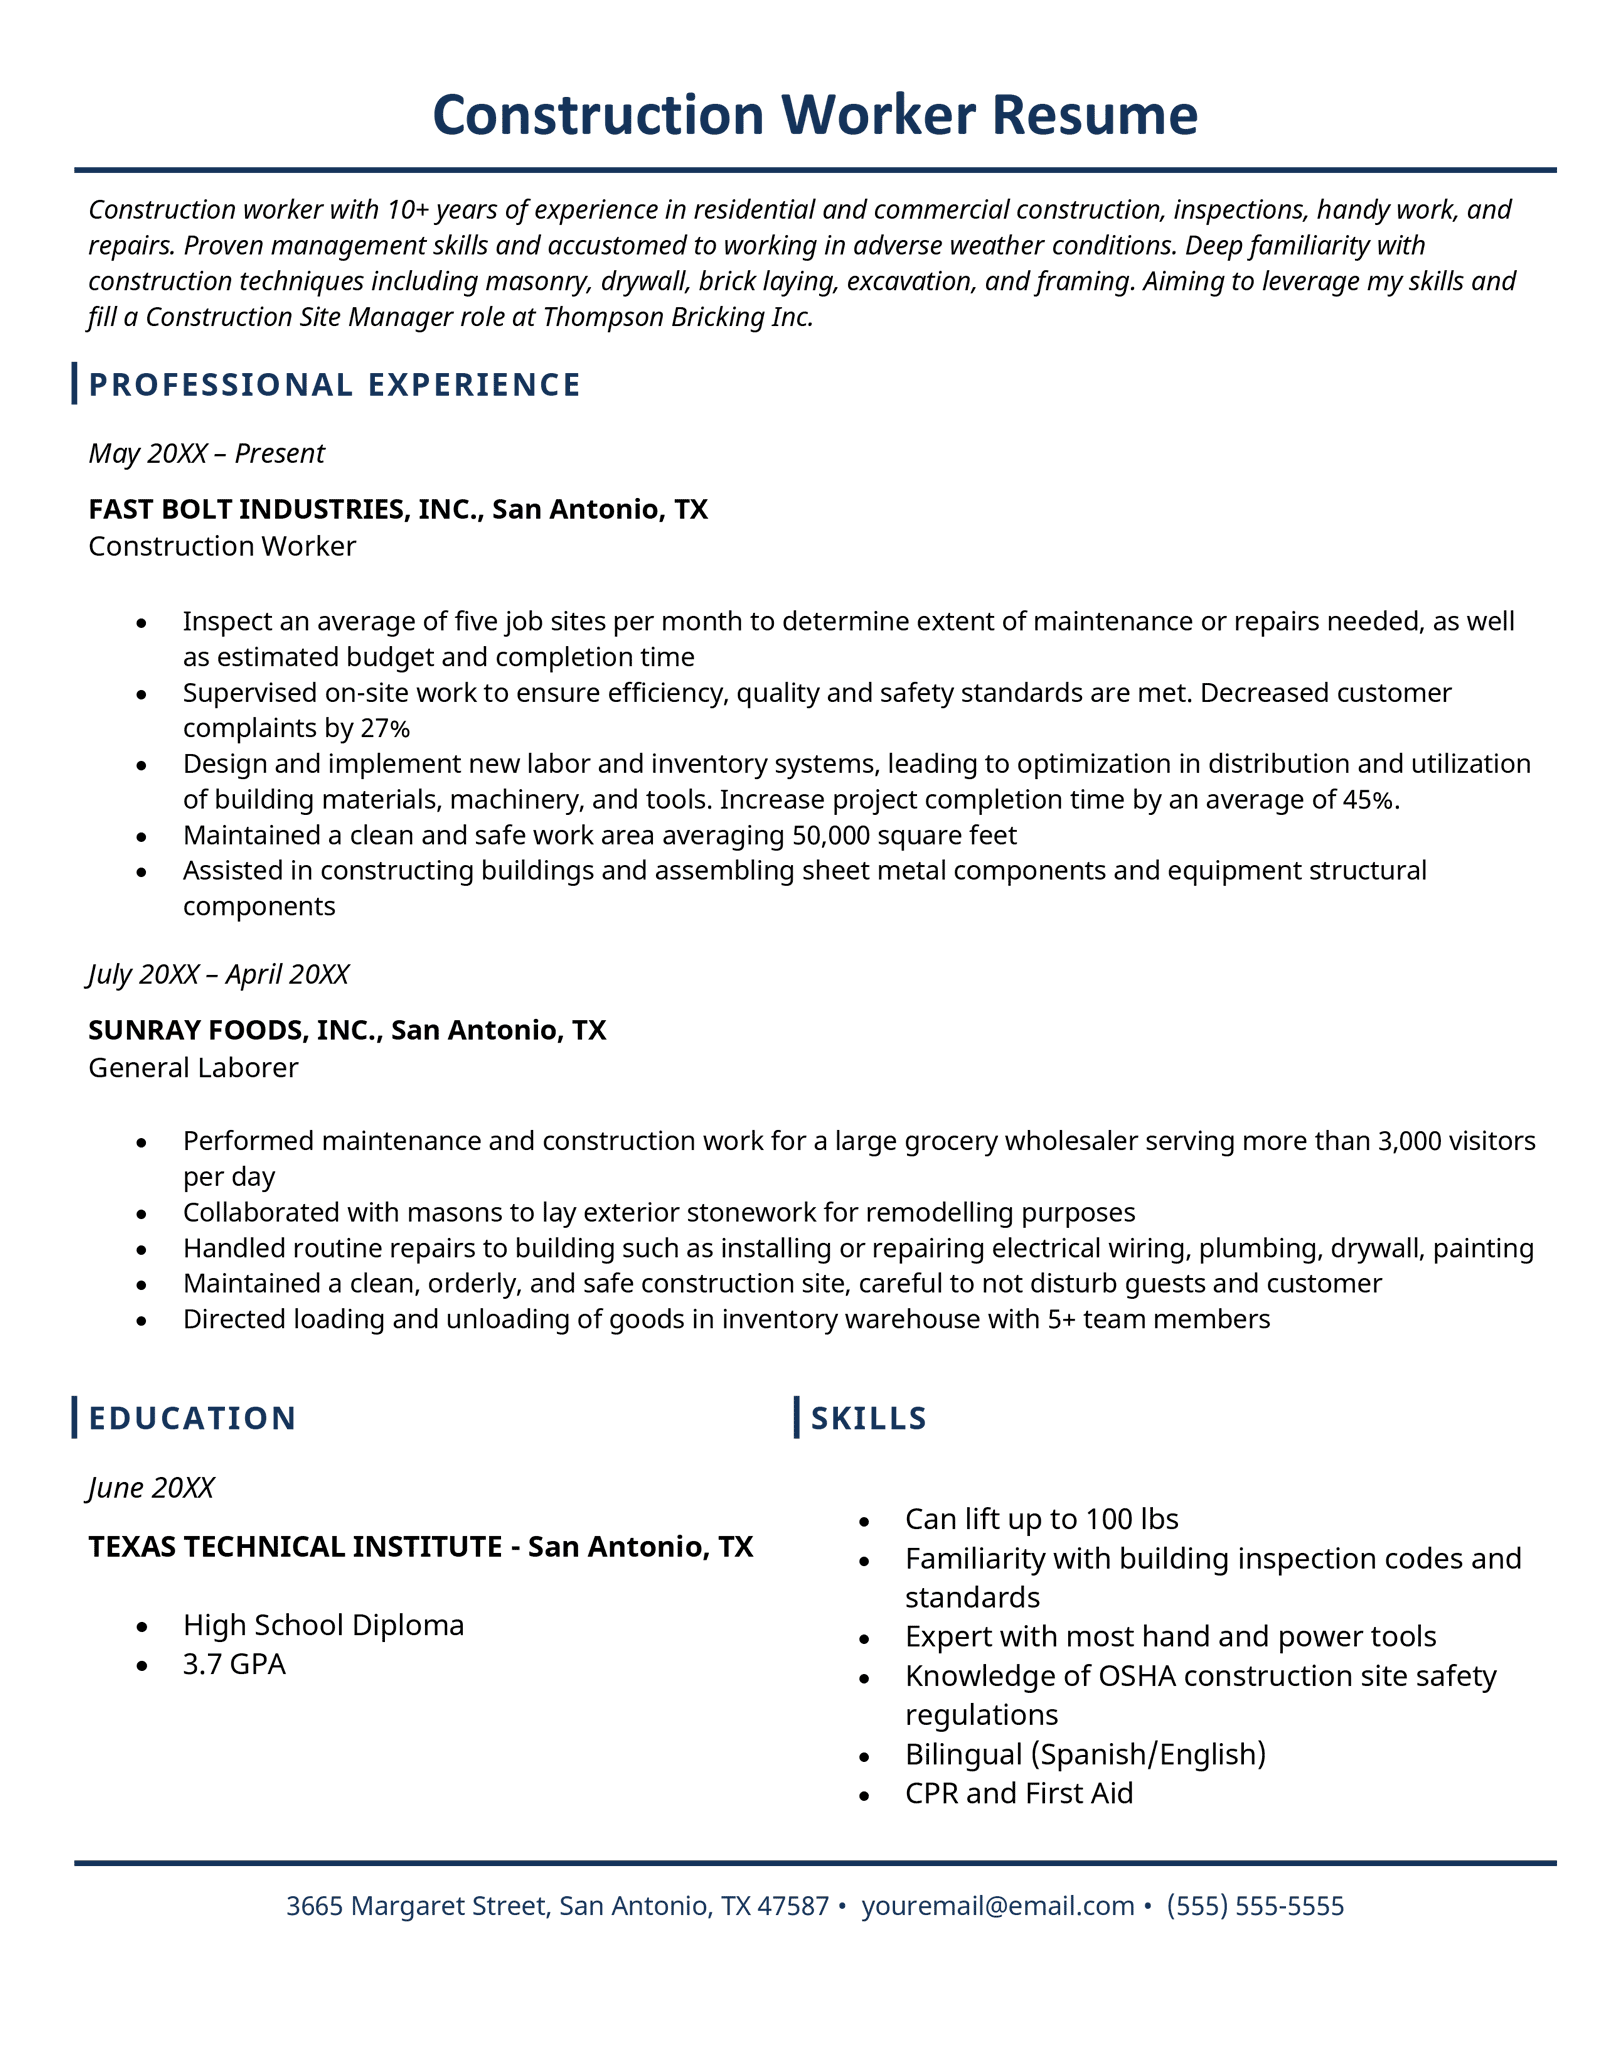 An example of a construction worker resume